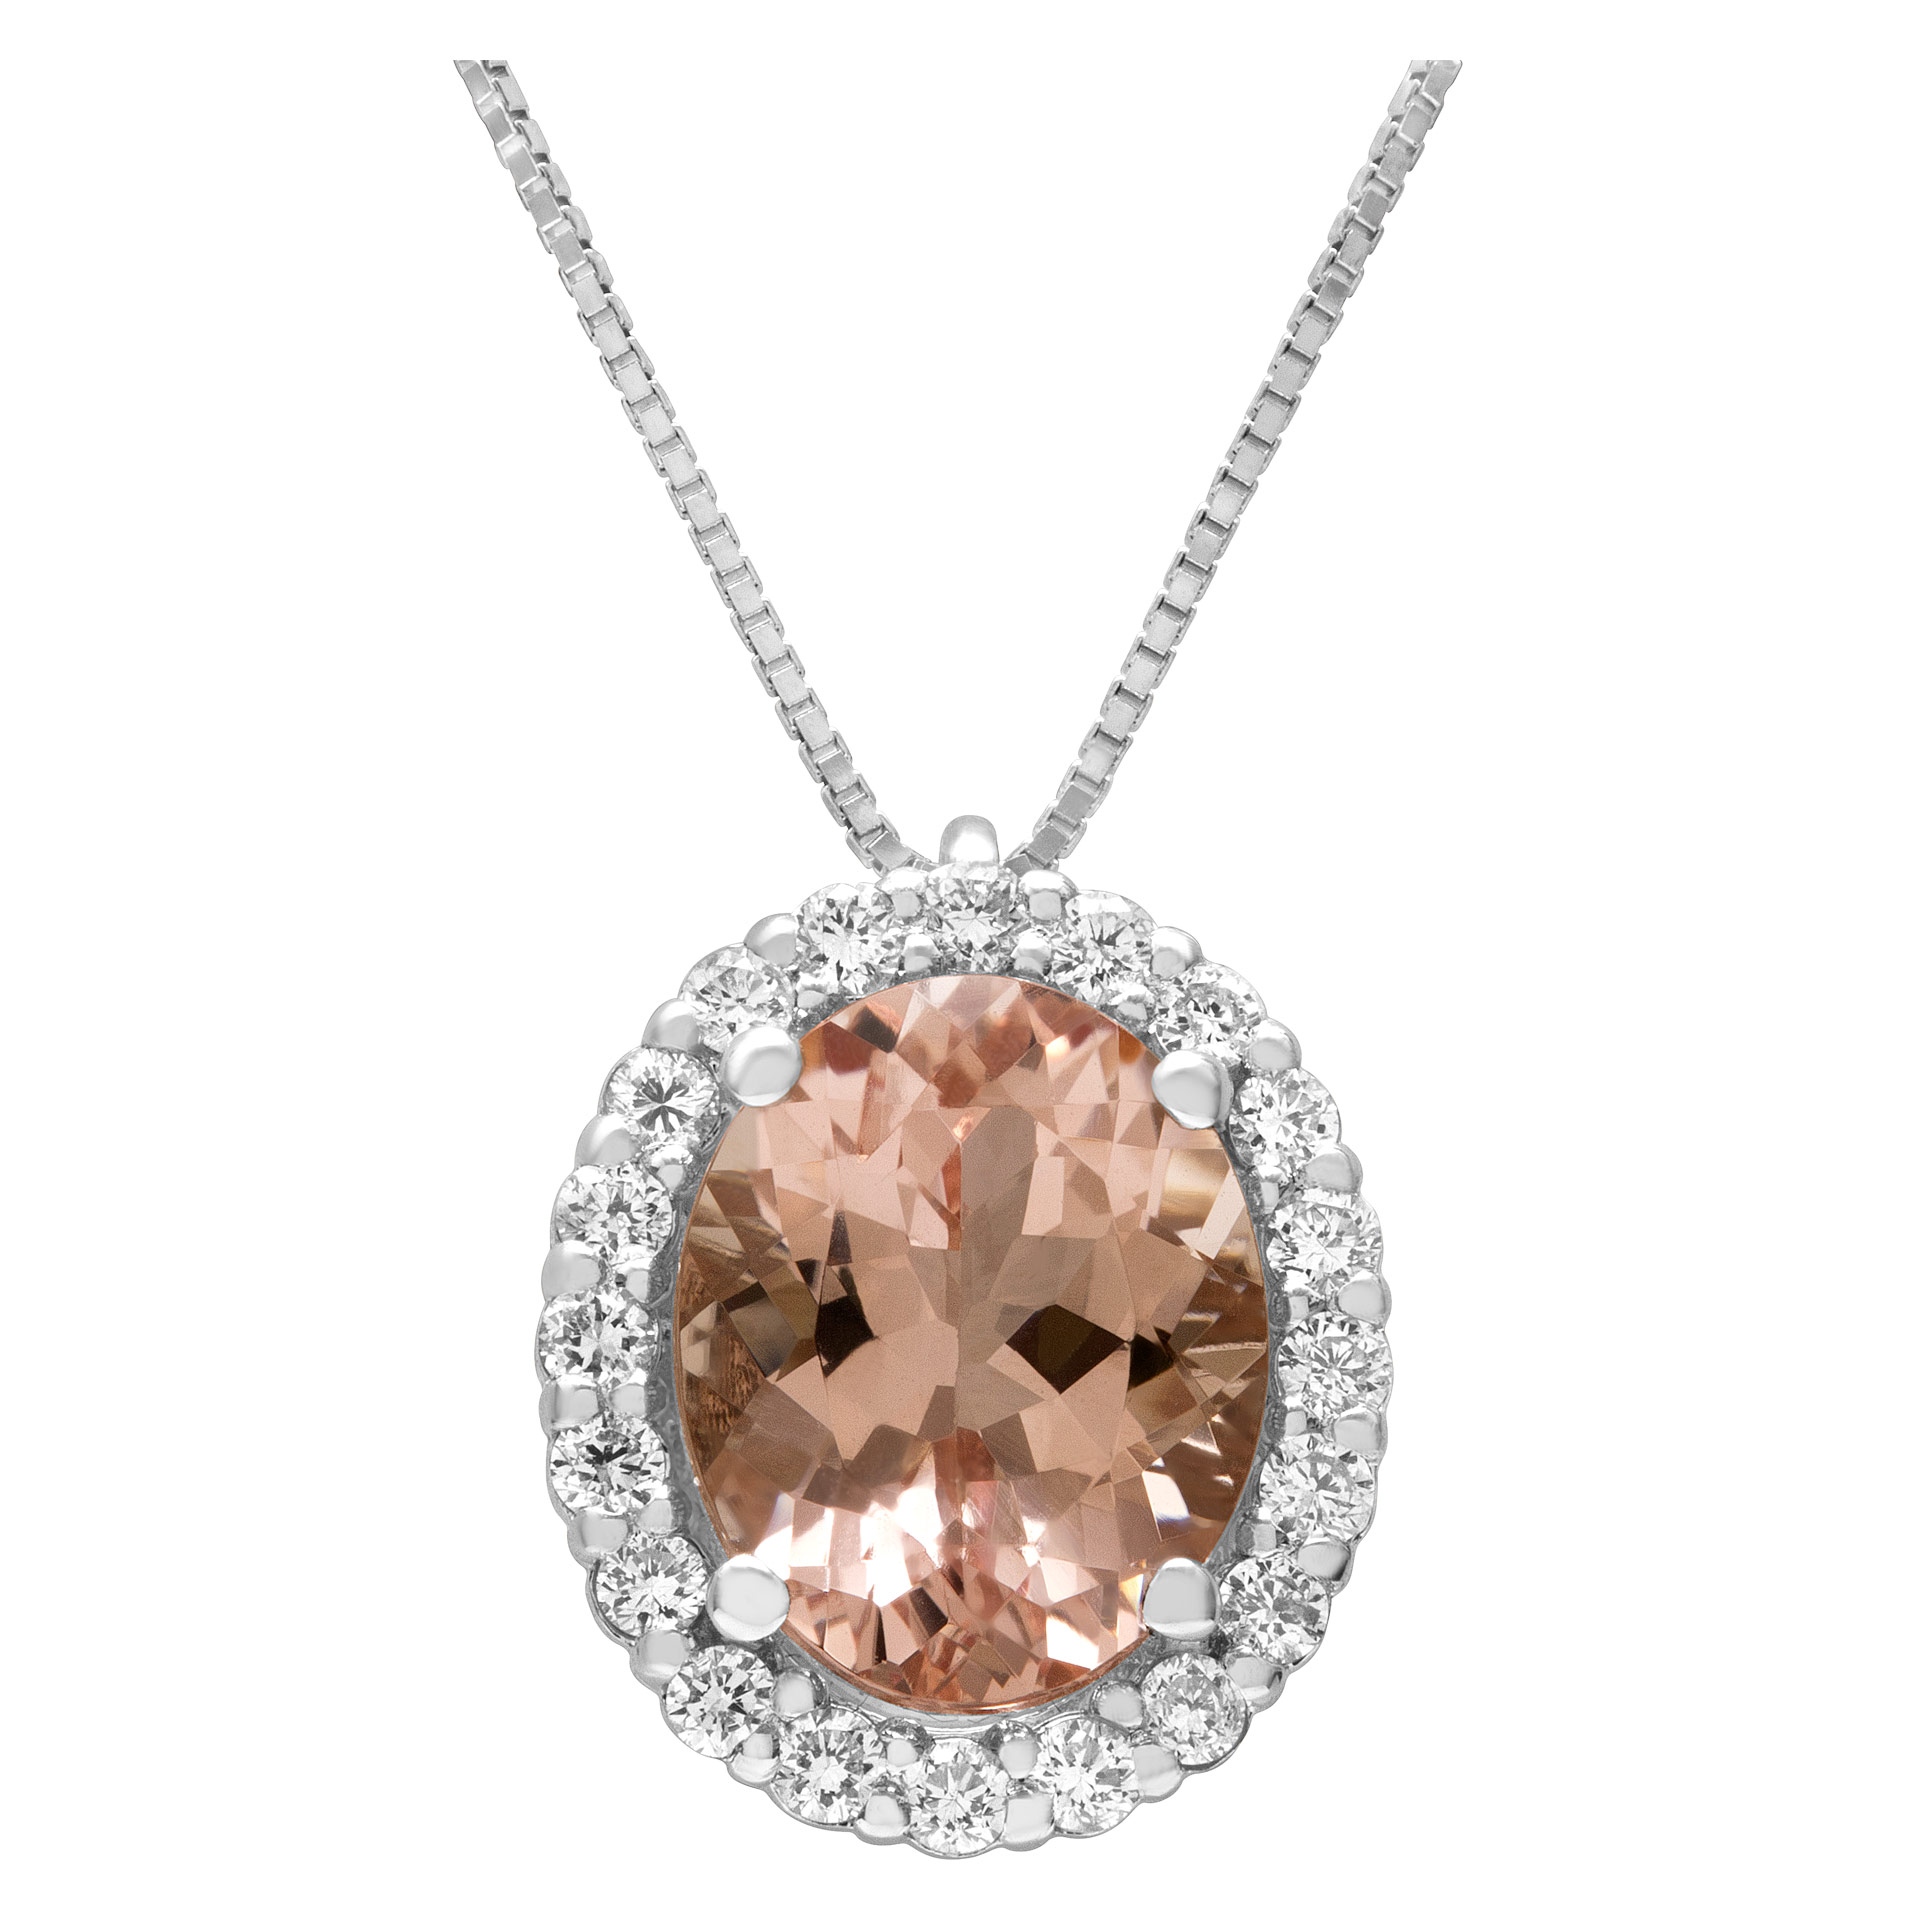 Morganite pendant with diamond accents 0.30 cts in diamonds in 18k white gold